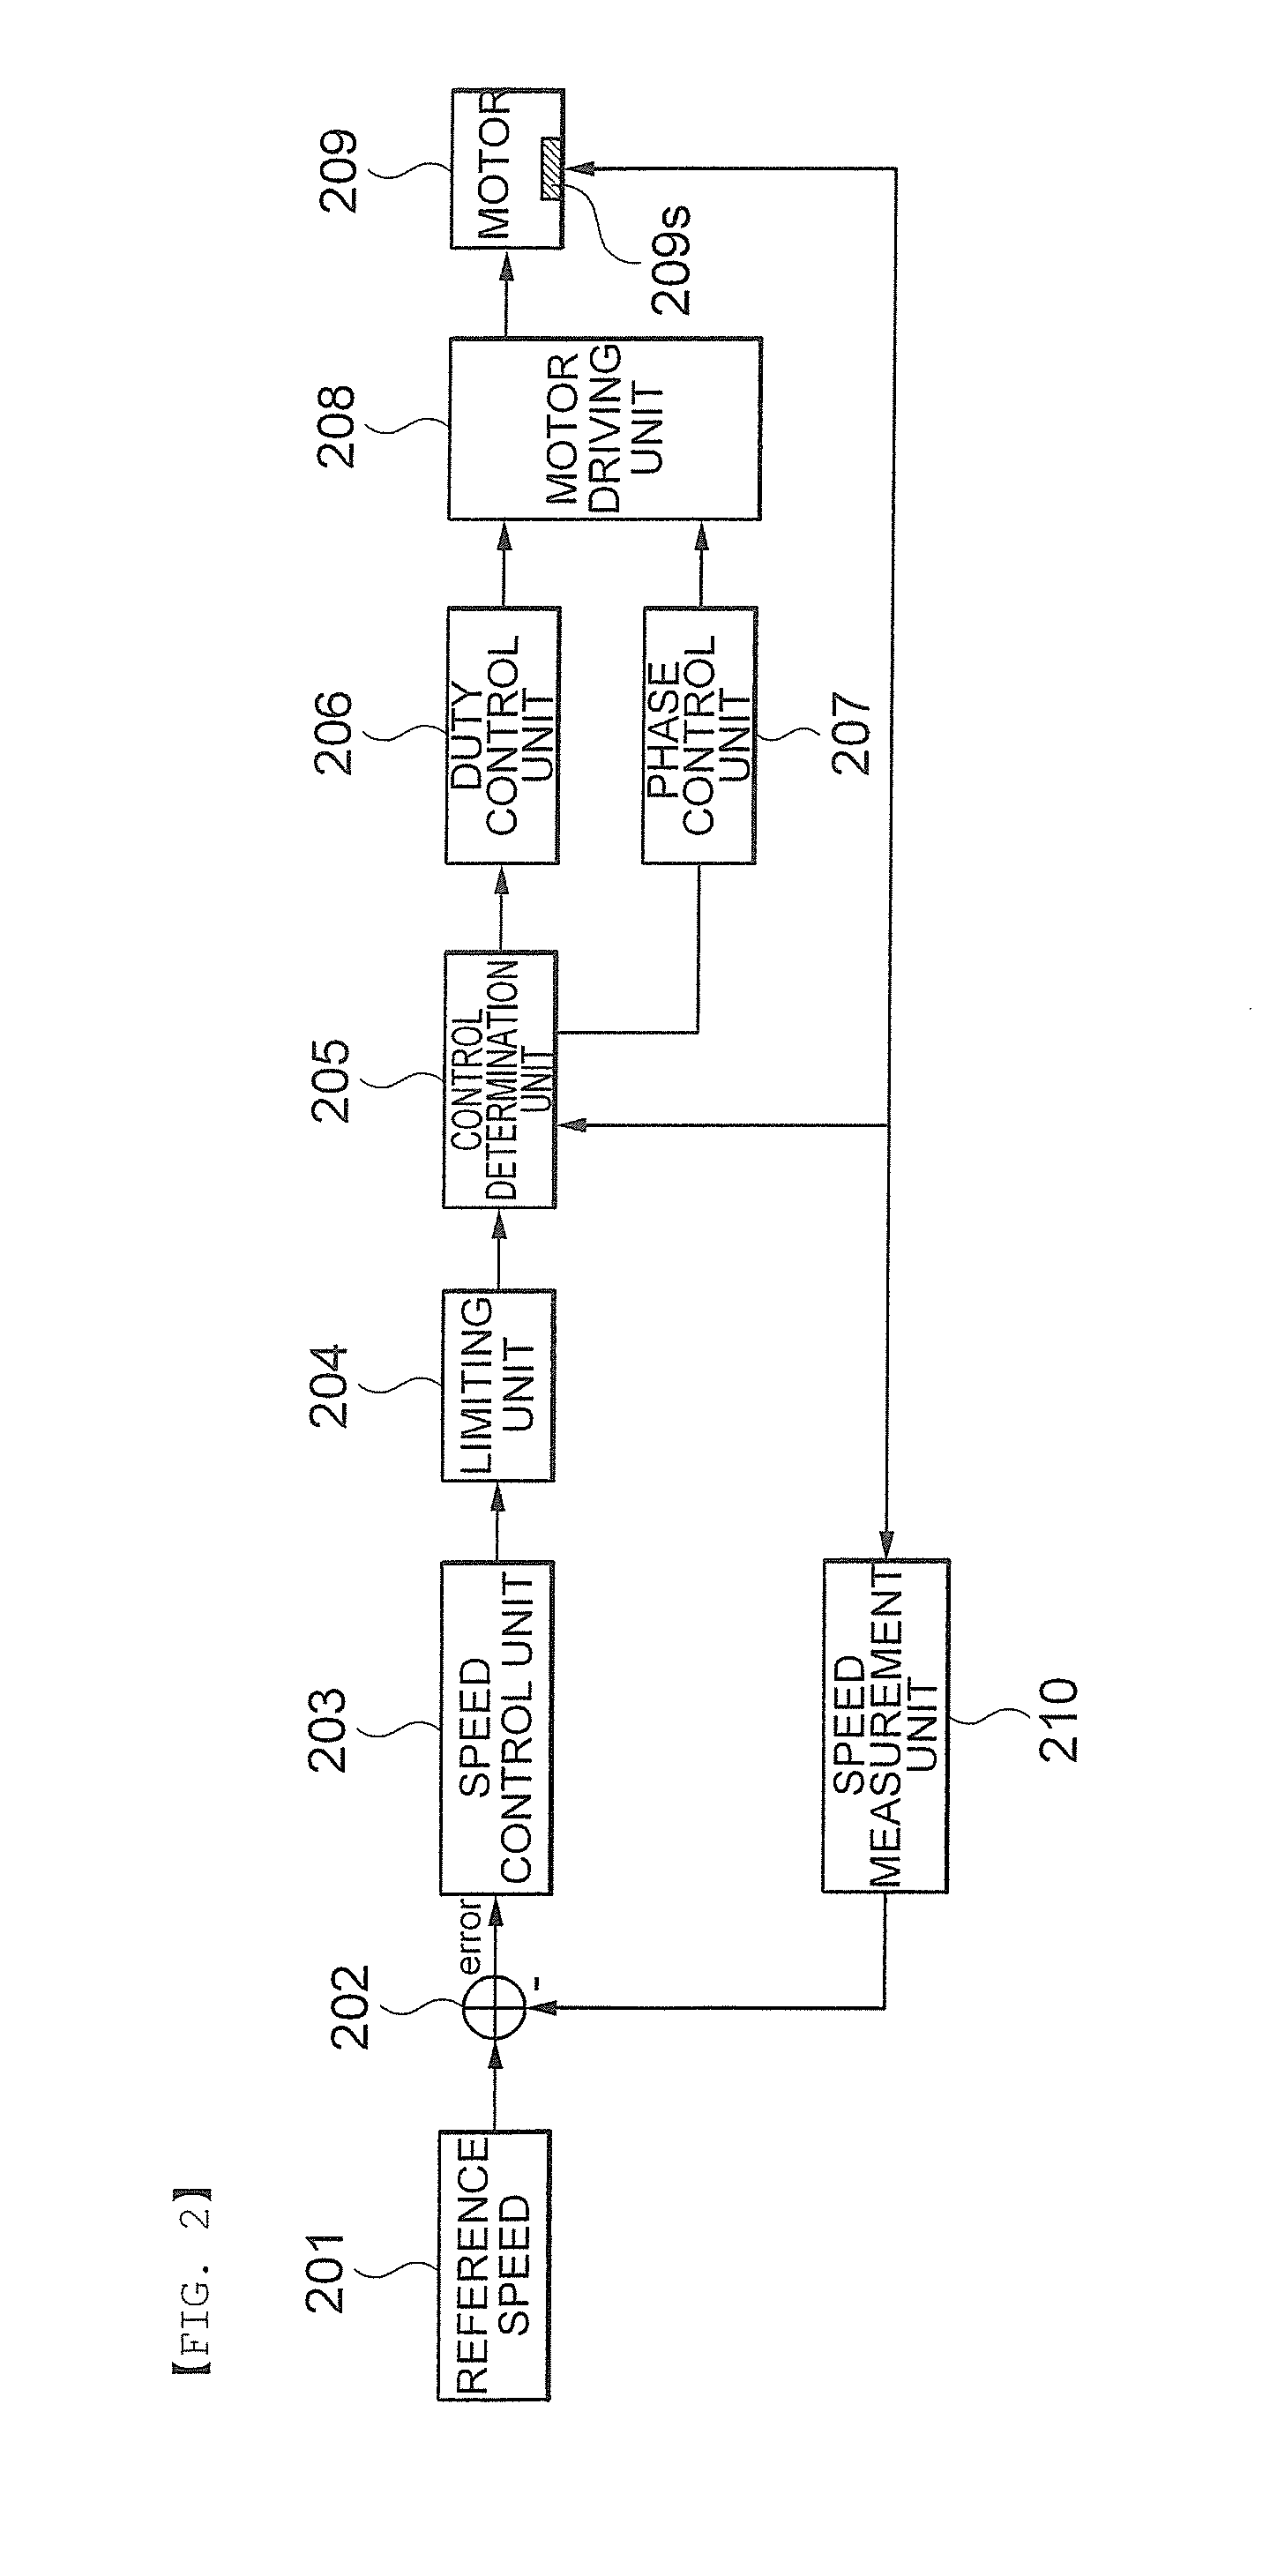 System and method for controlling speed of motor